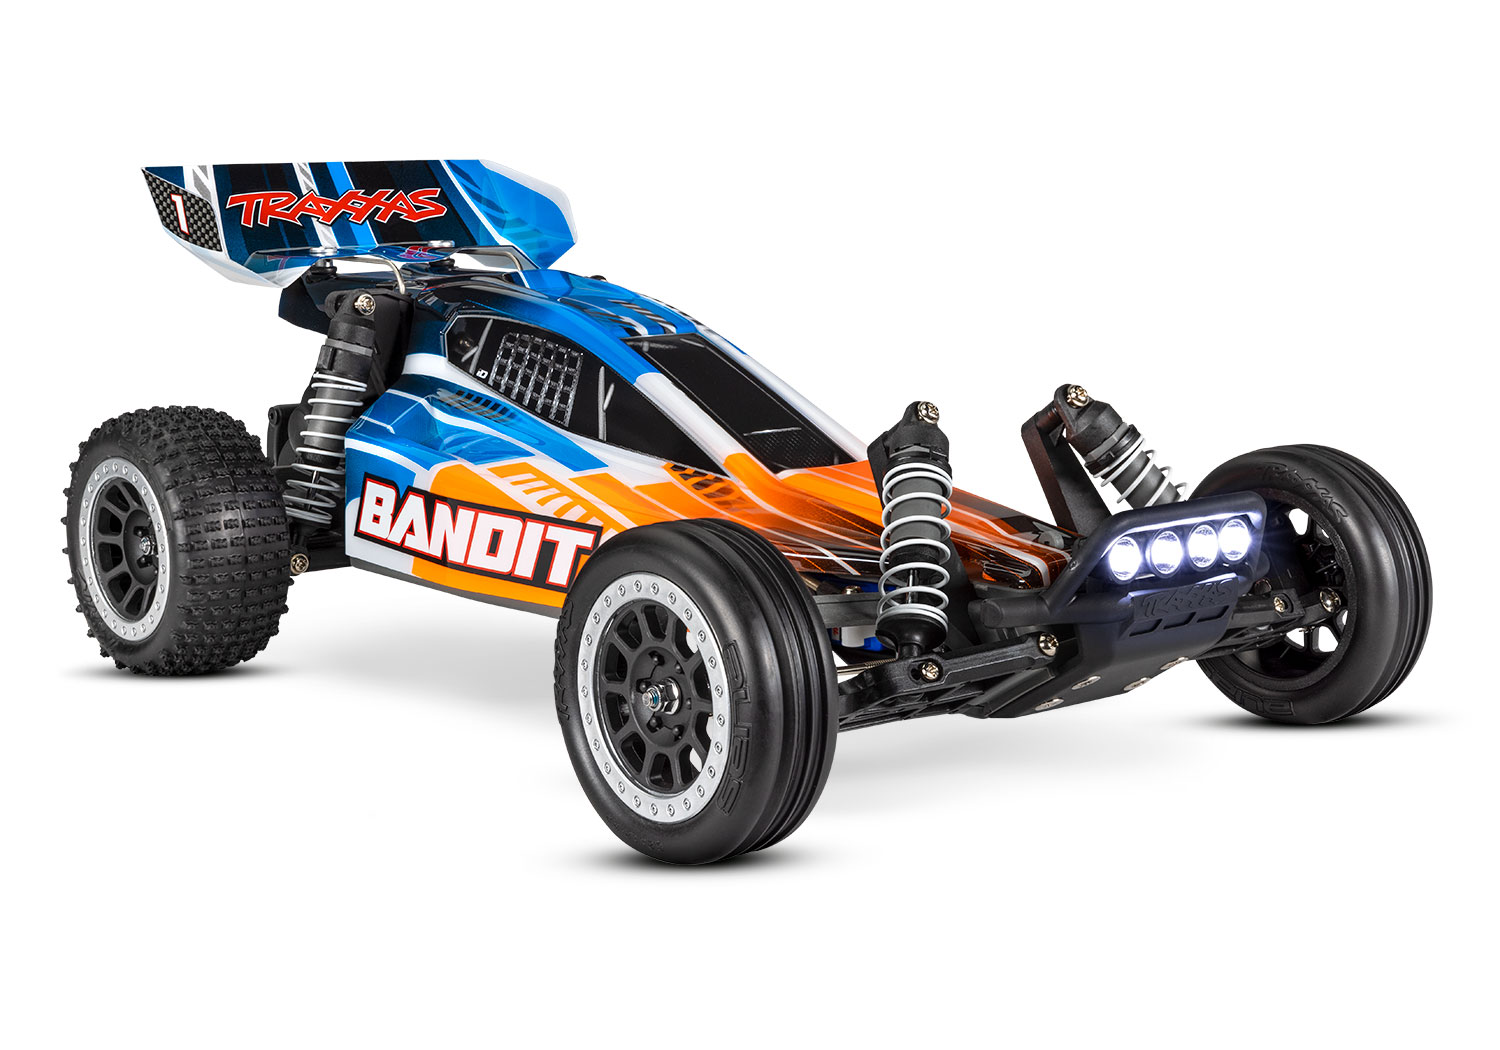 Traxxas Bandit XL5 2WD electro buggy RTR 2.4Ghz met LED verlichting inclusief Power Pack - Oranje